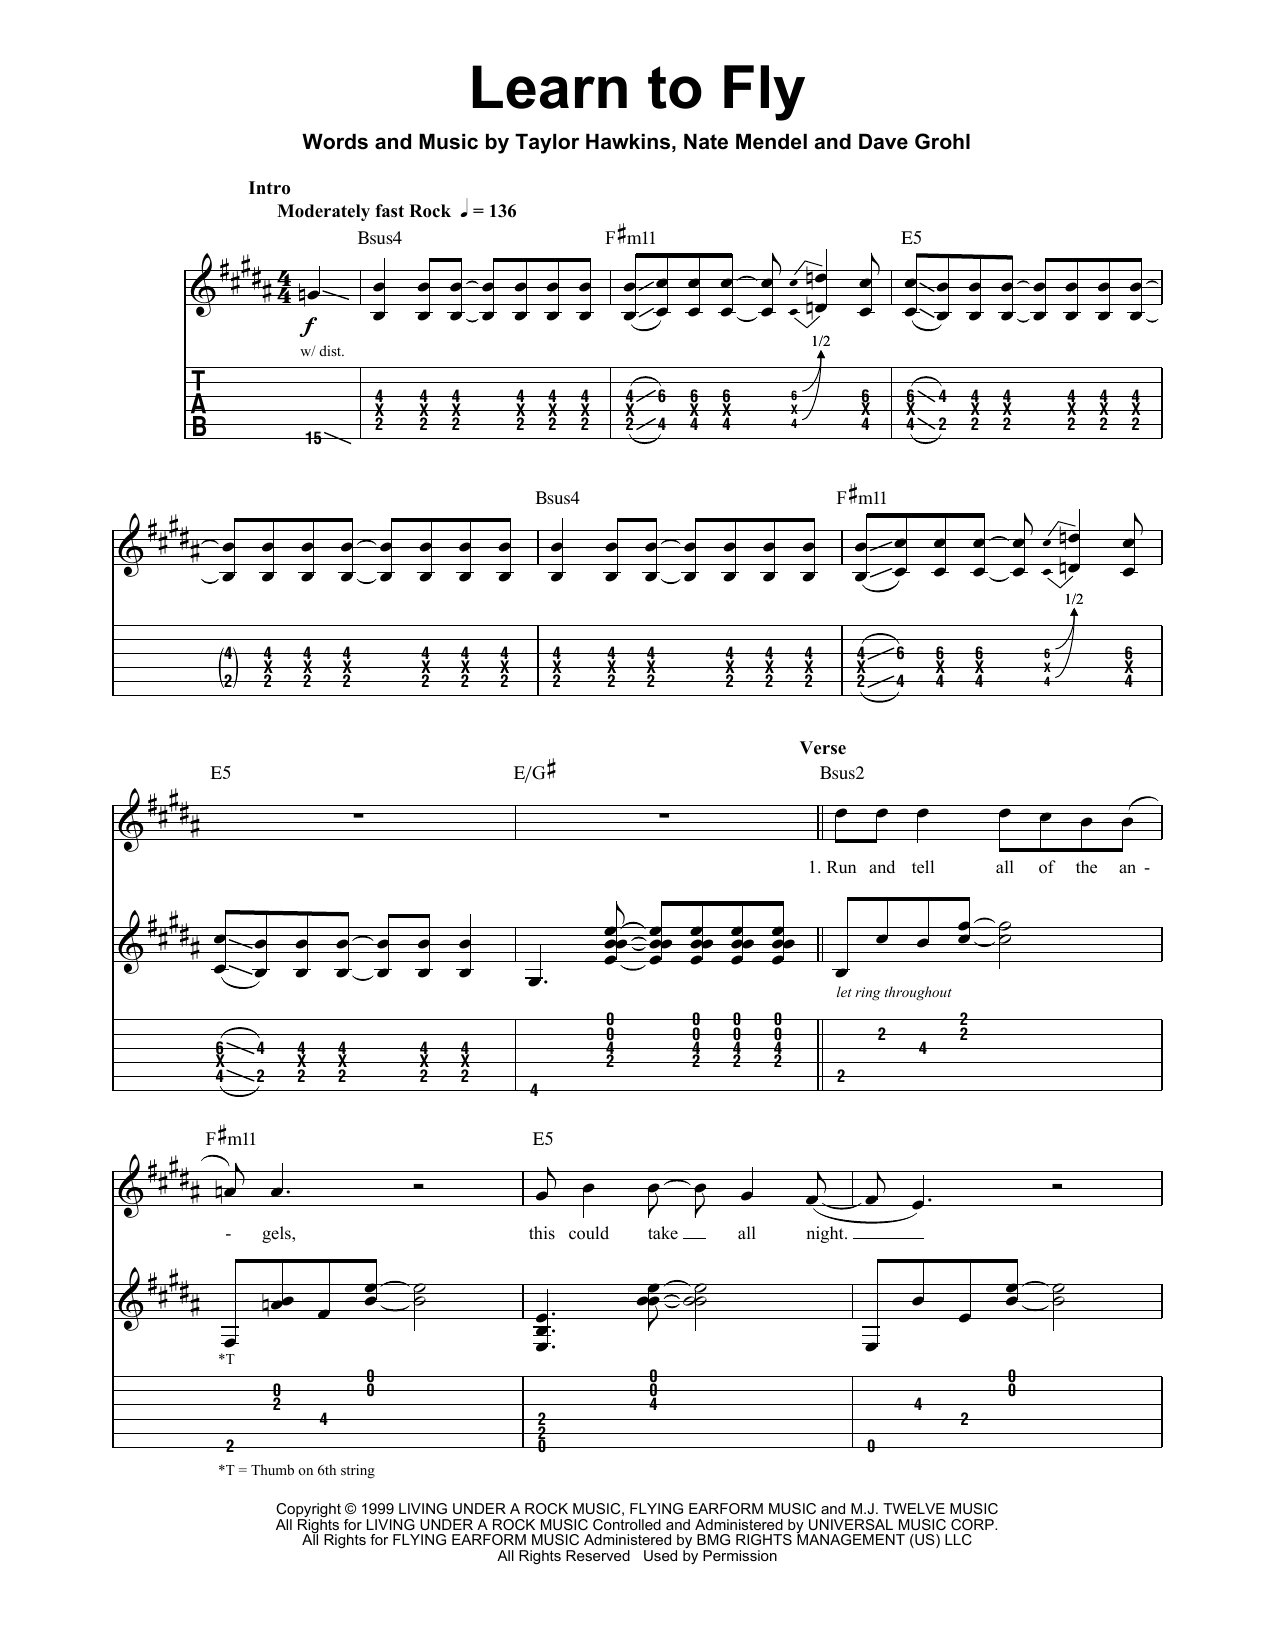 Learn To Fly sheet music